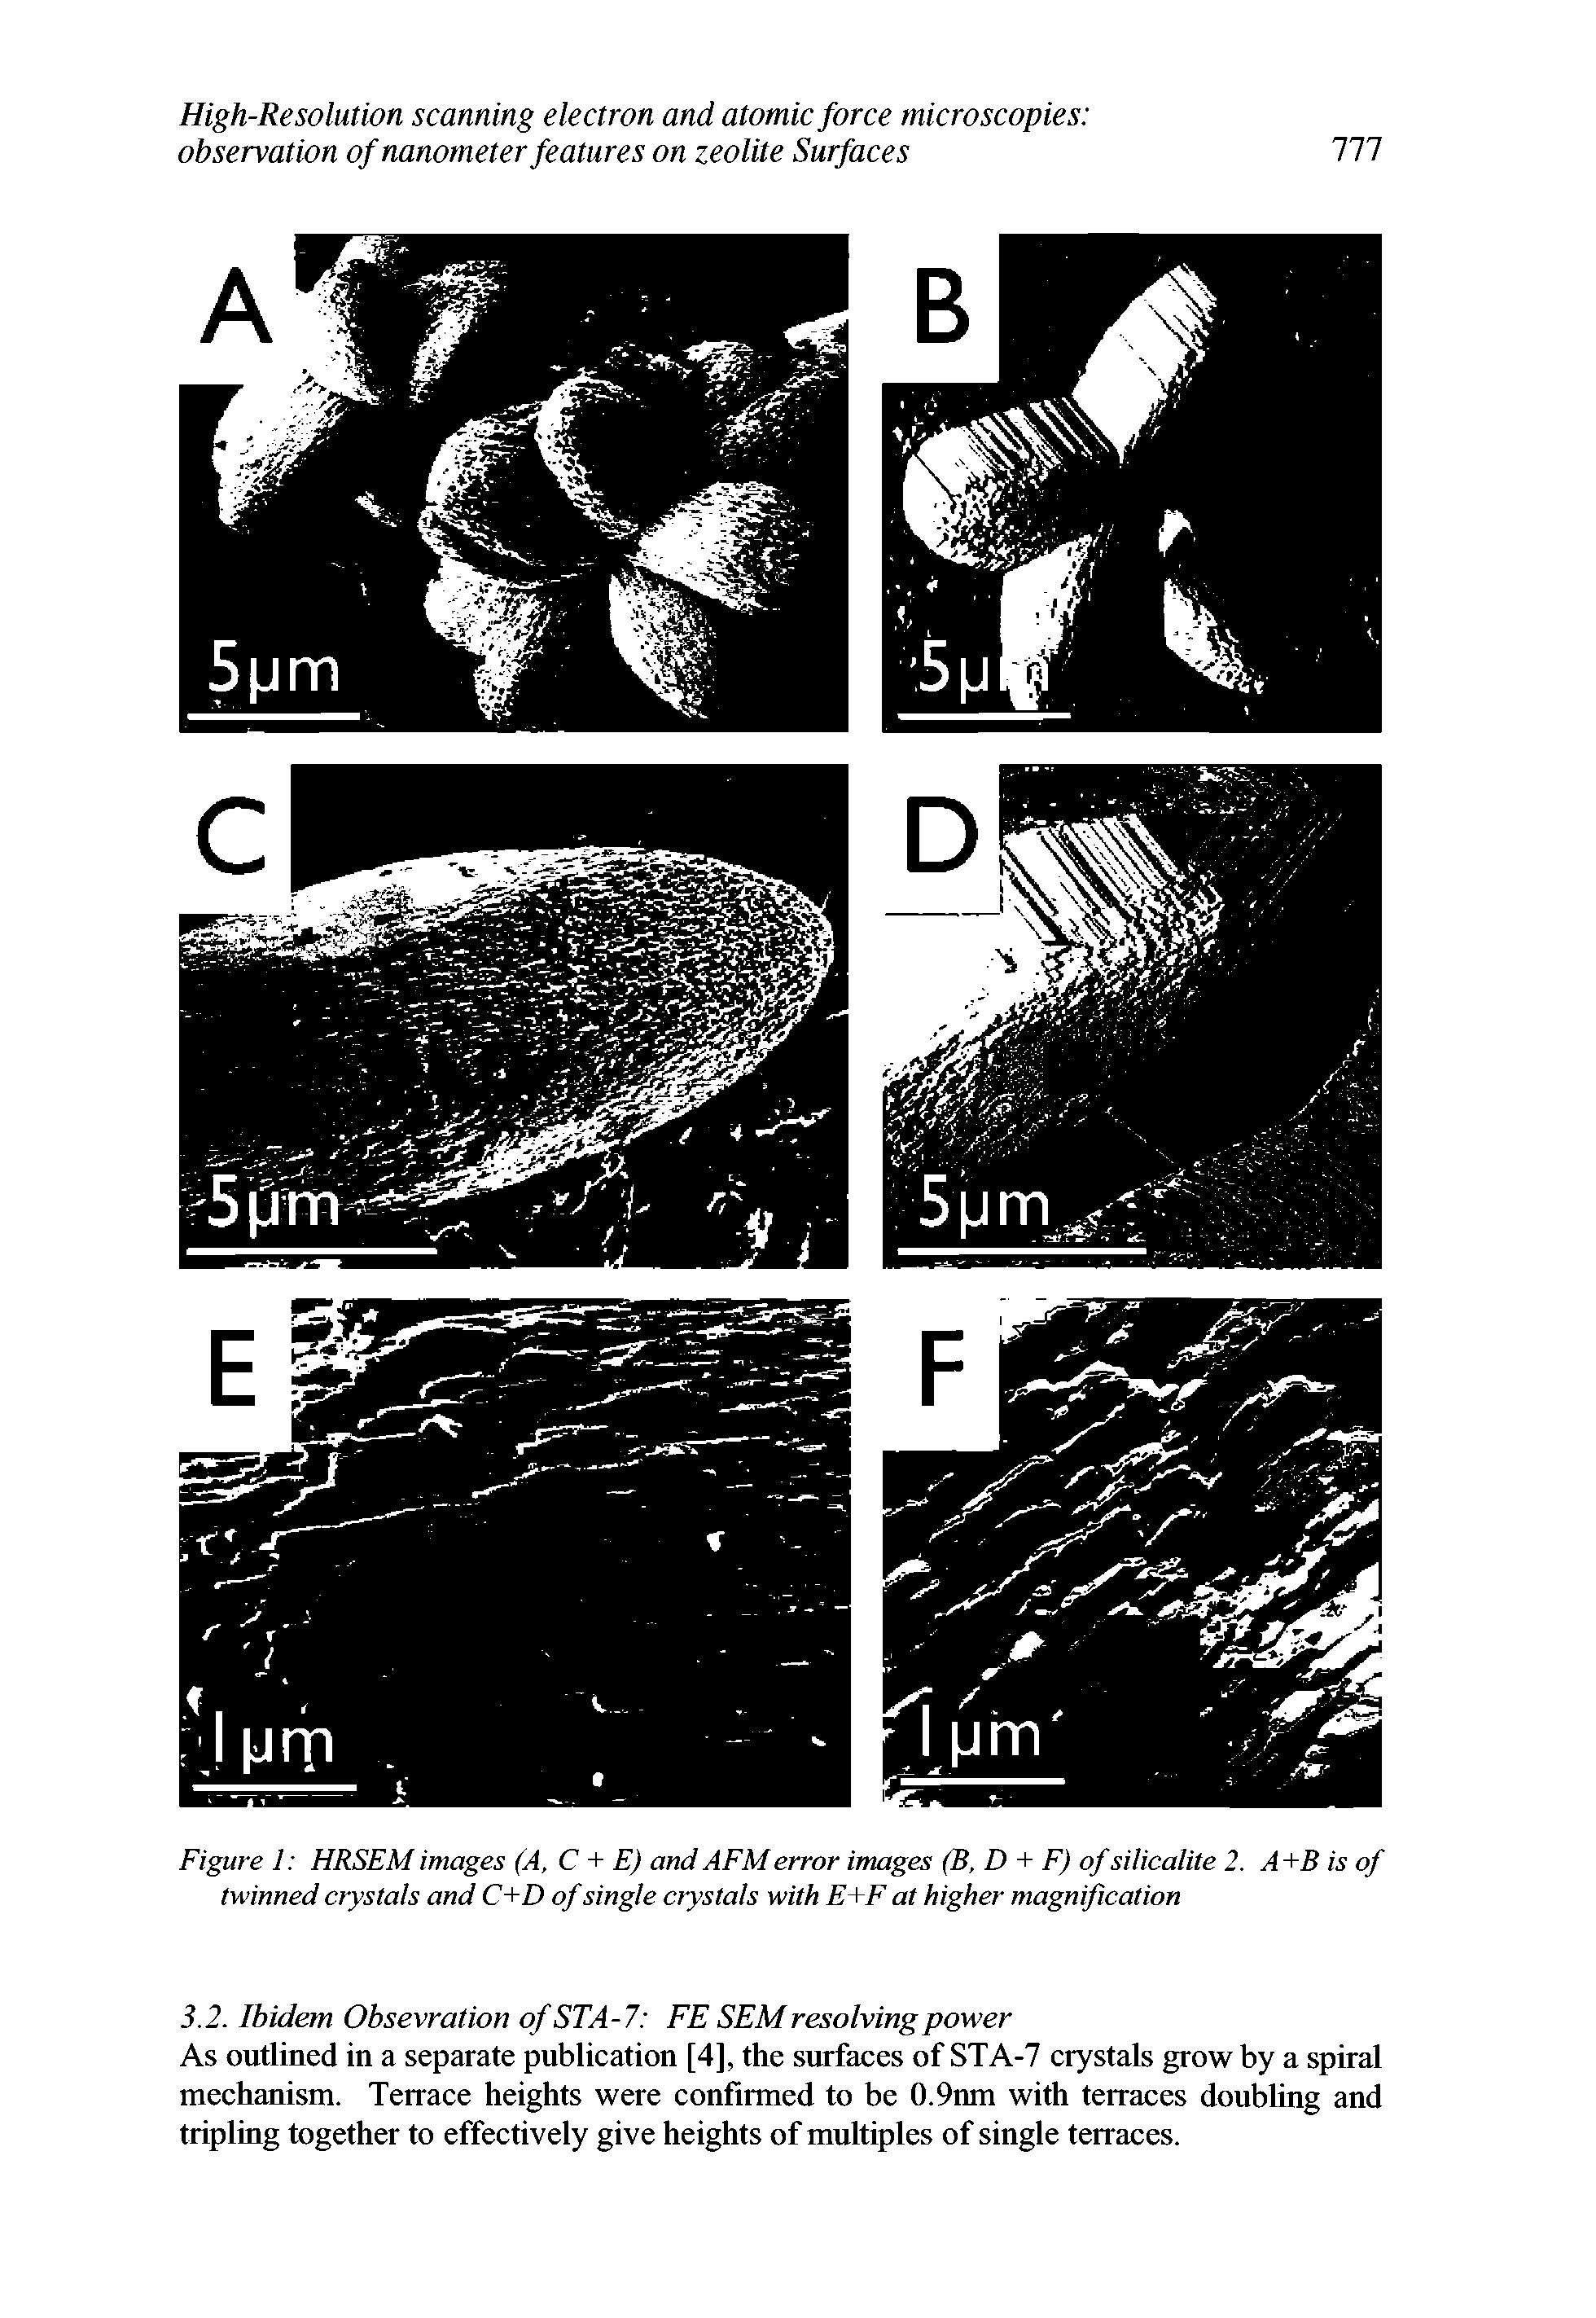 Figure 1 HRSEM images (A, C + E) and AFMerror images (B, D + F) of silicalite 2. A +B is of twinned crystals and C+D of single crystals with E+F at higher magnification...